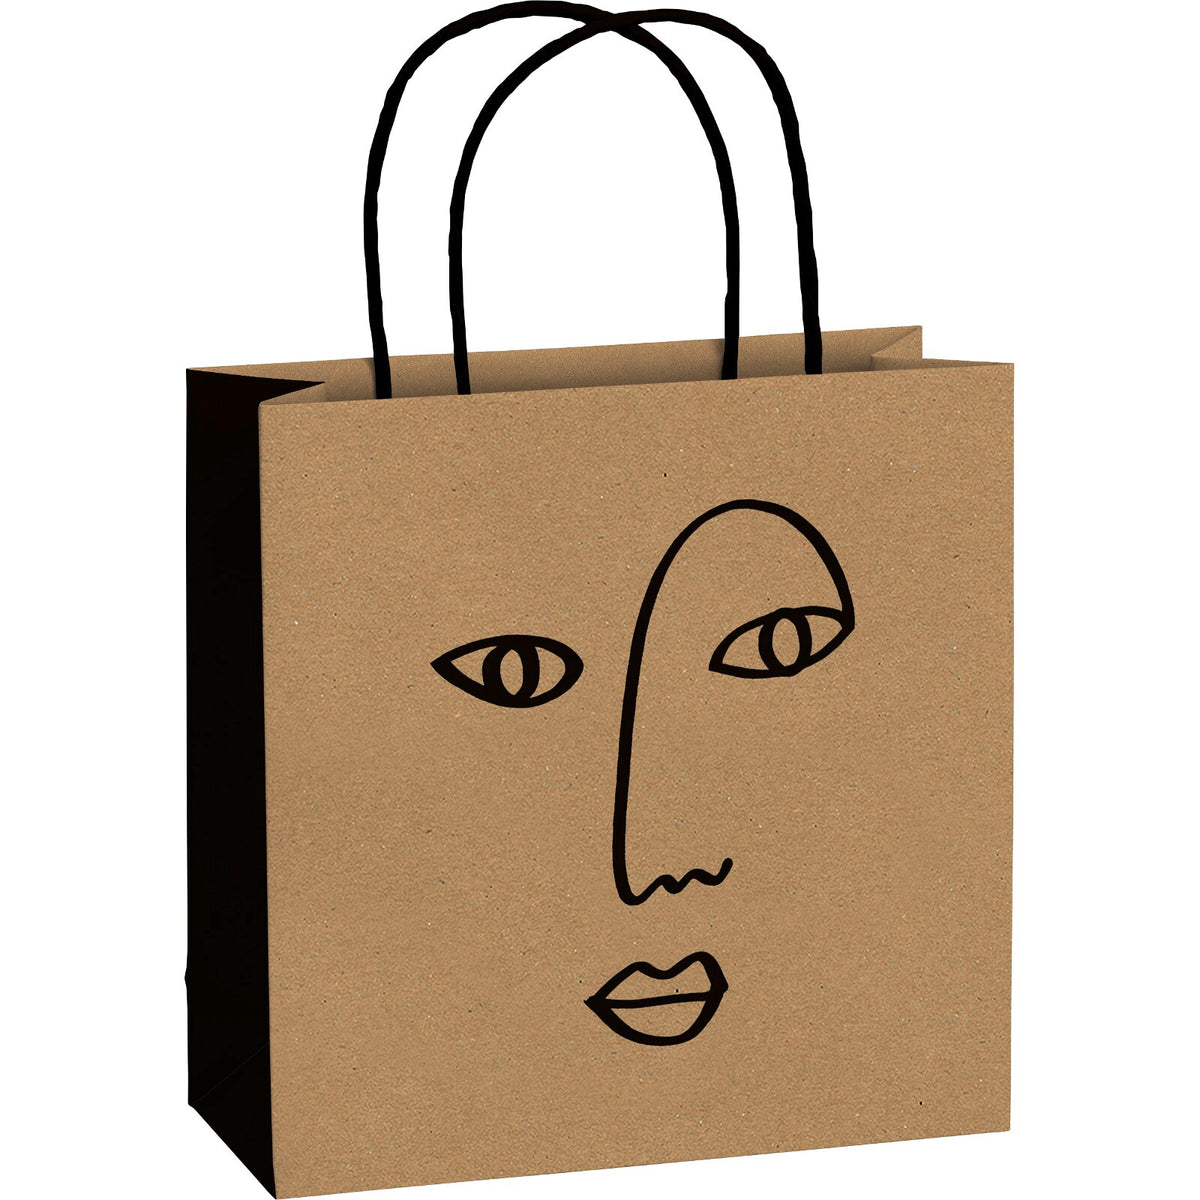 Taio Artful Medium Gift Bags 3 Pk by stewo at penny black